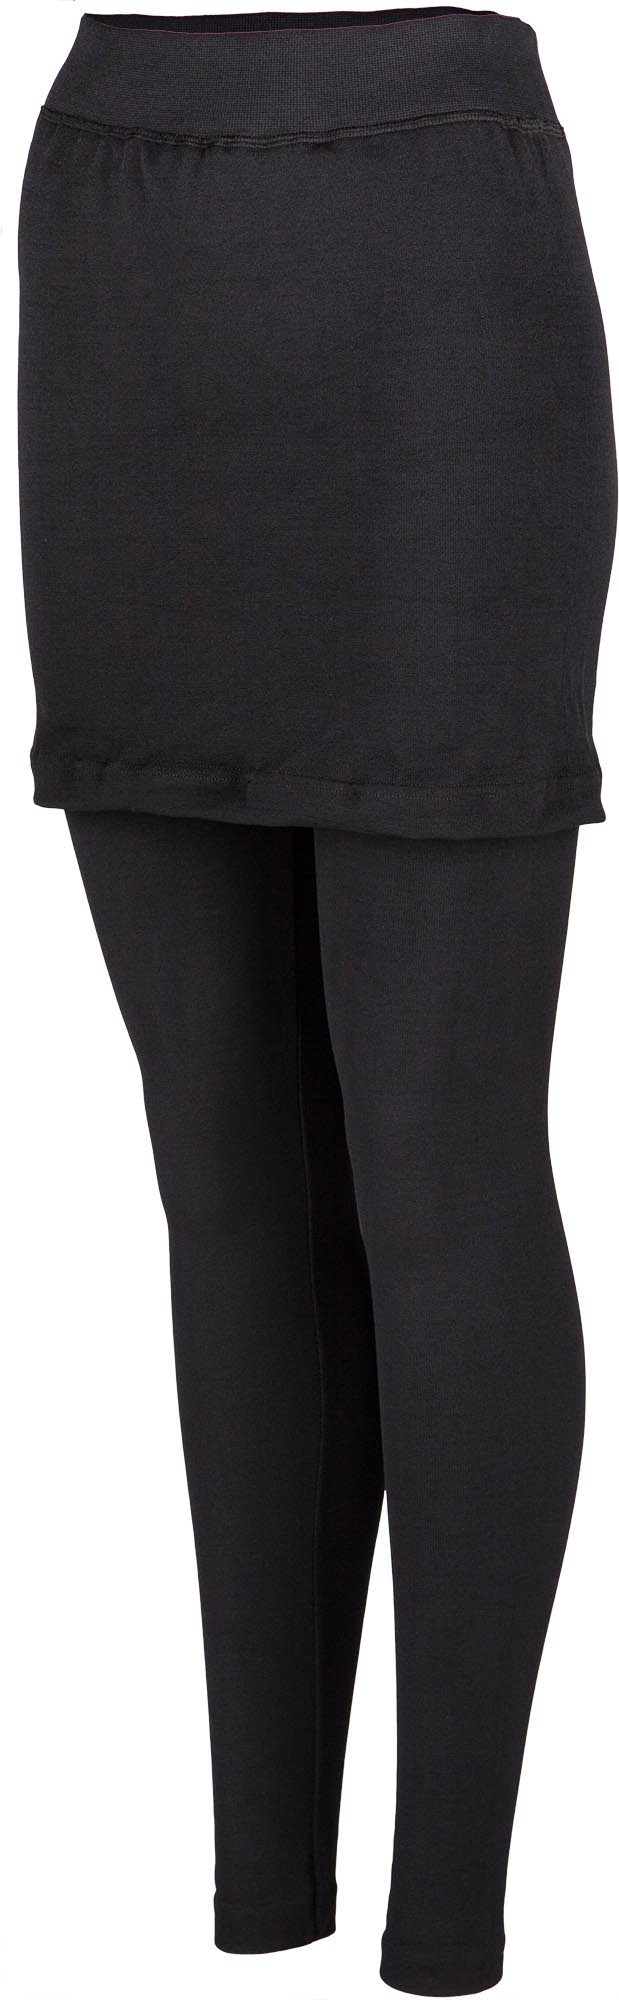 Women’s tights with a skirt